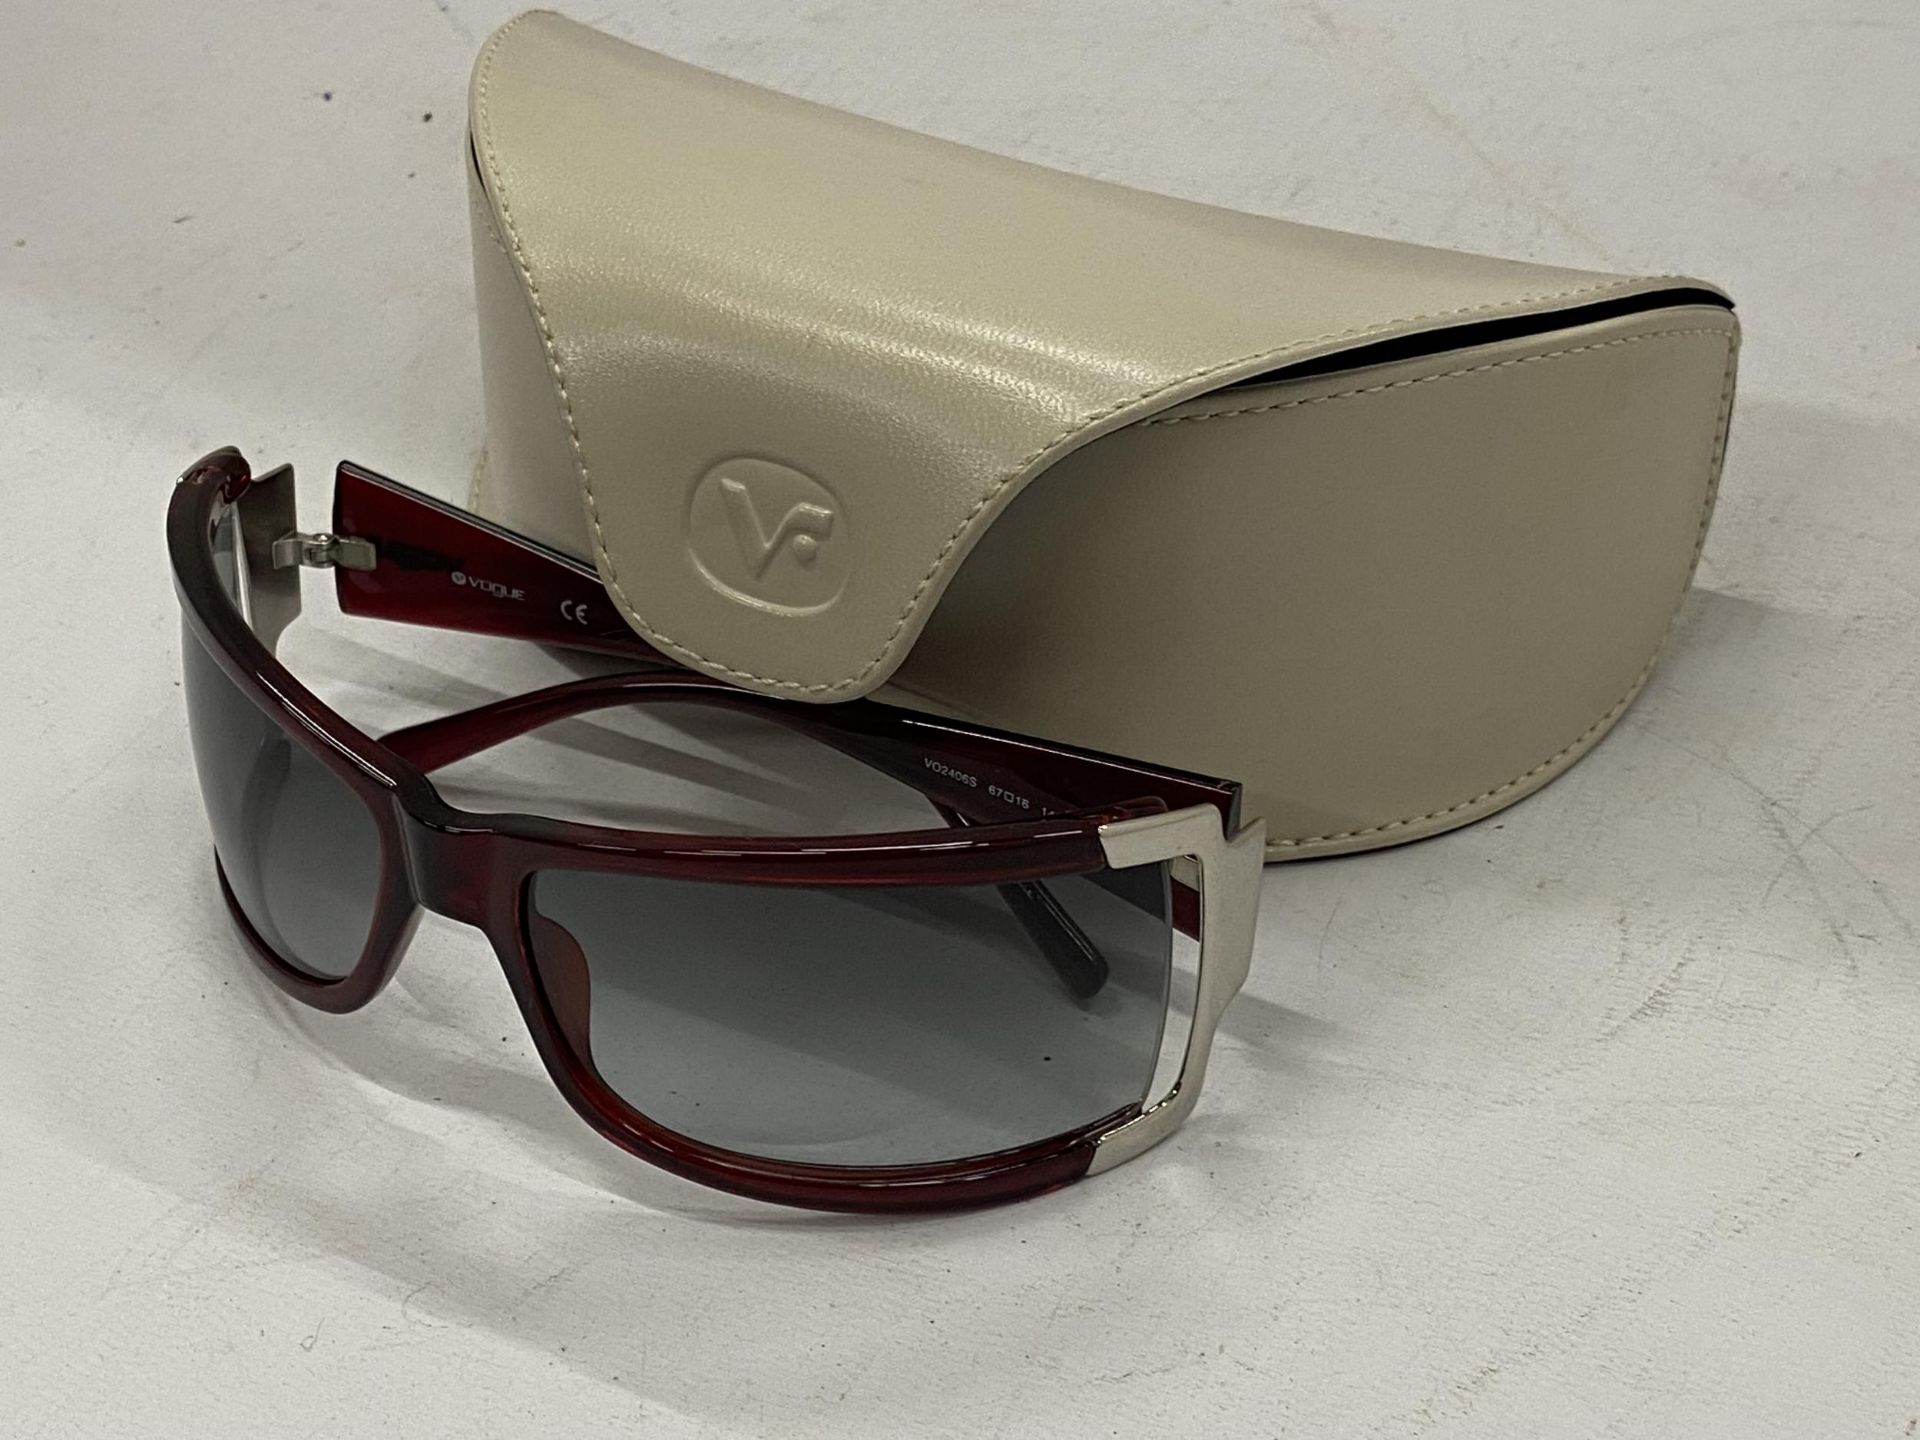 A PAIR OF VOGUE SUNGLASSES WITH CASE - Image 2 of 4